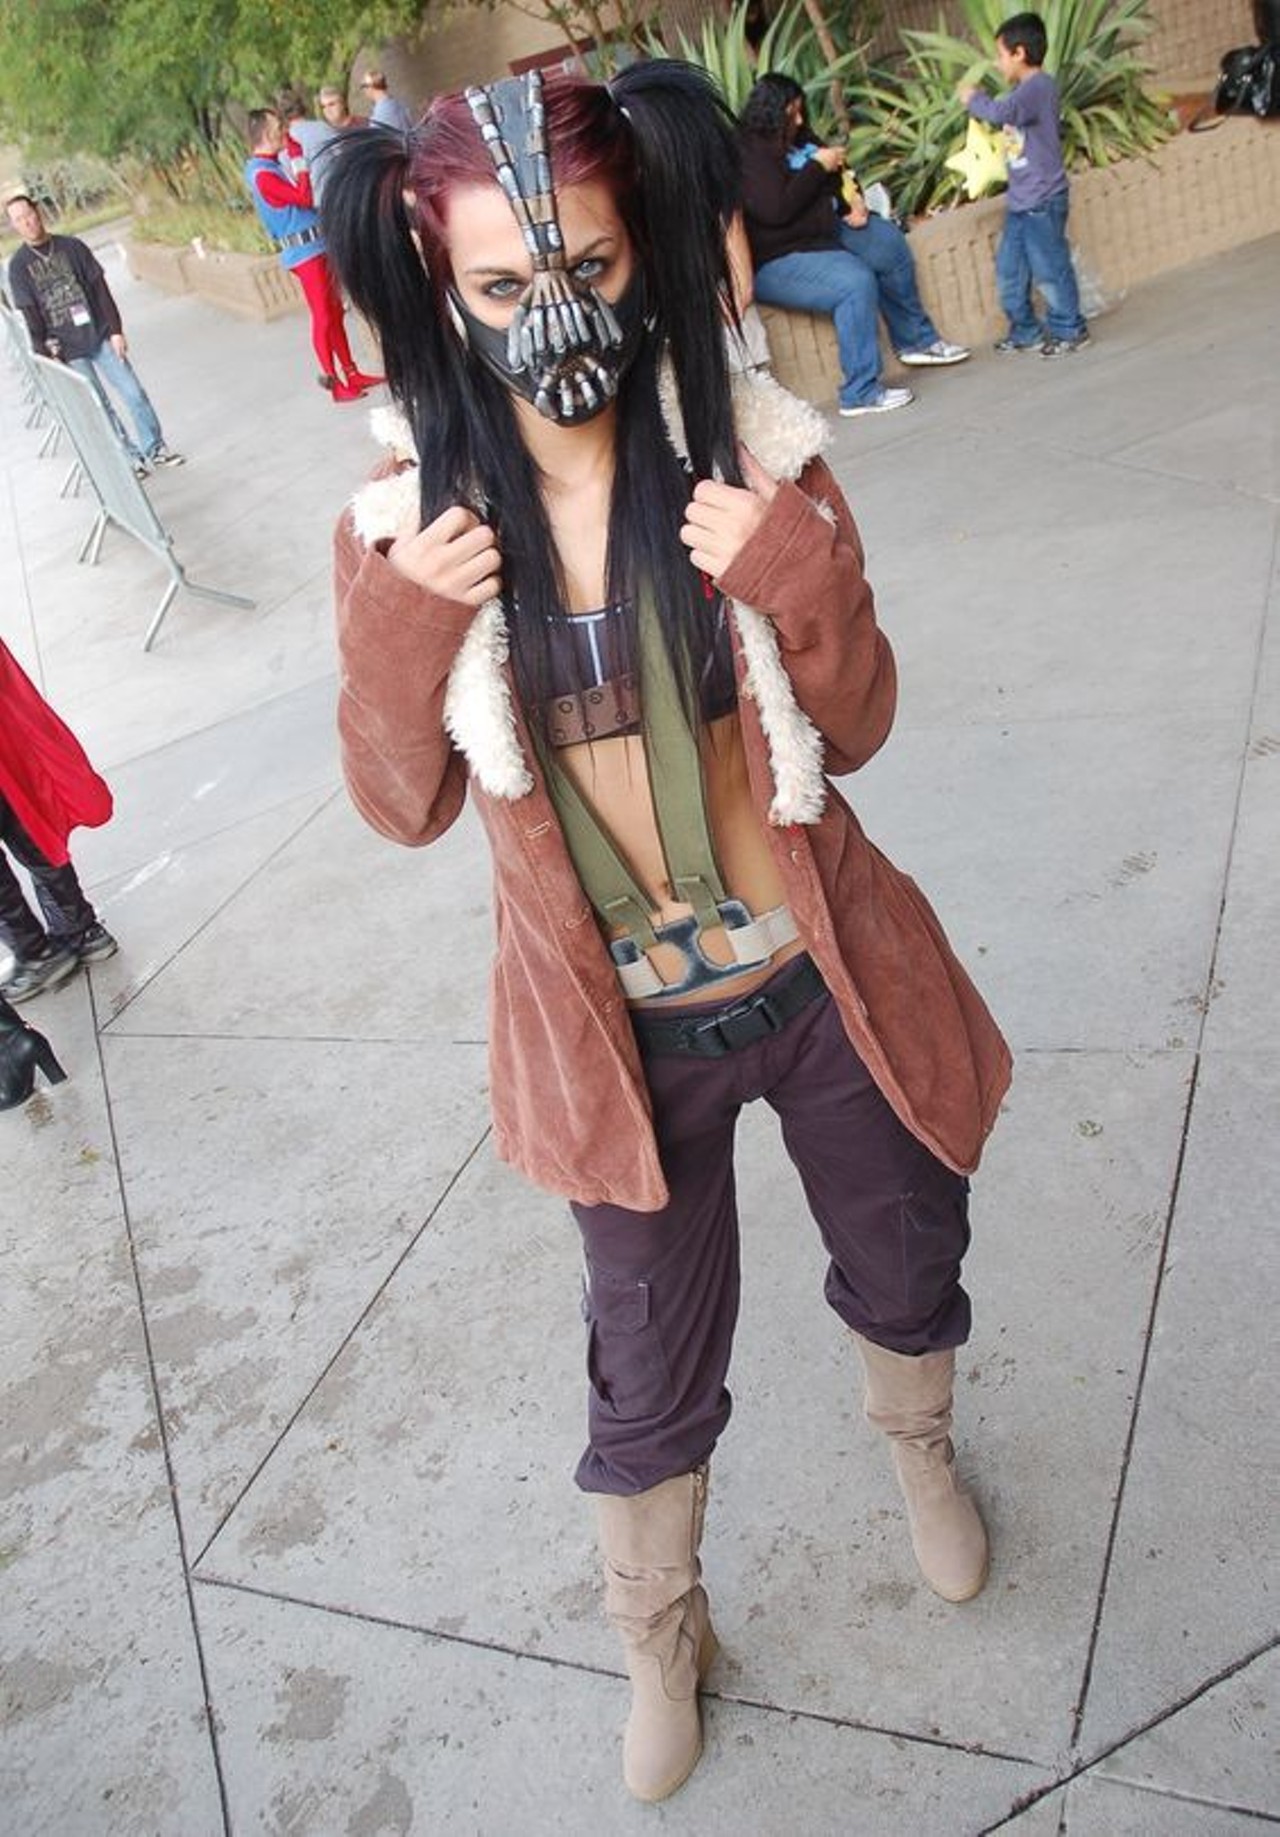 Spotted at Amazing Arizona Comic Con 2013, which went down back in January in Phoenix. Photo by Benjamin Leatherman.